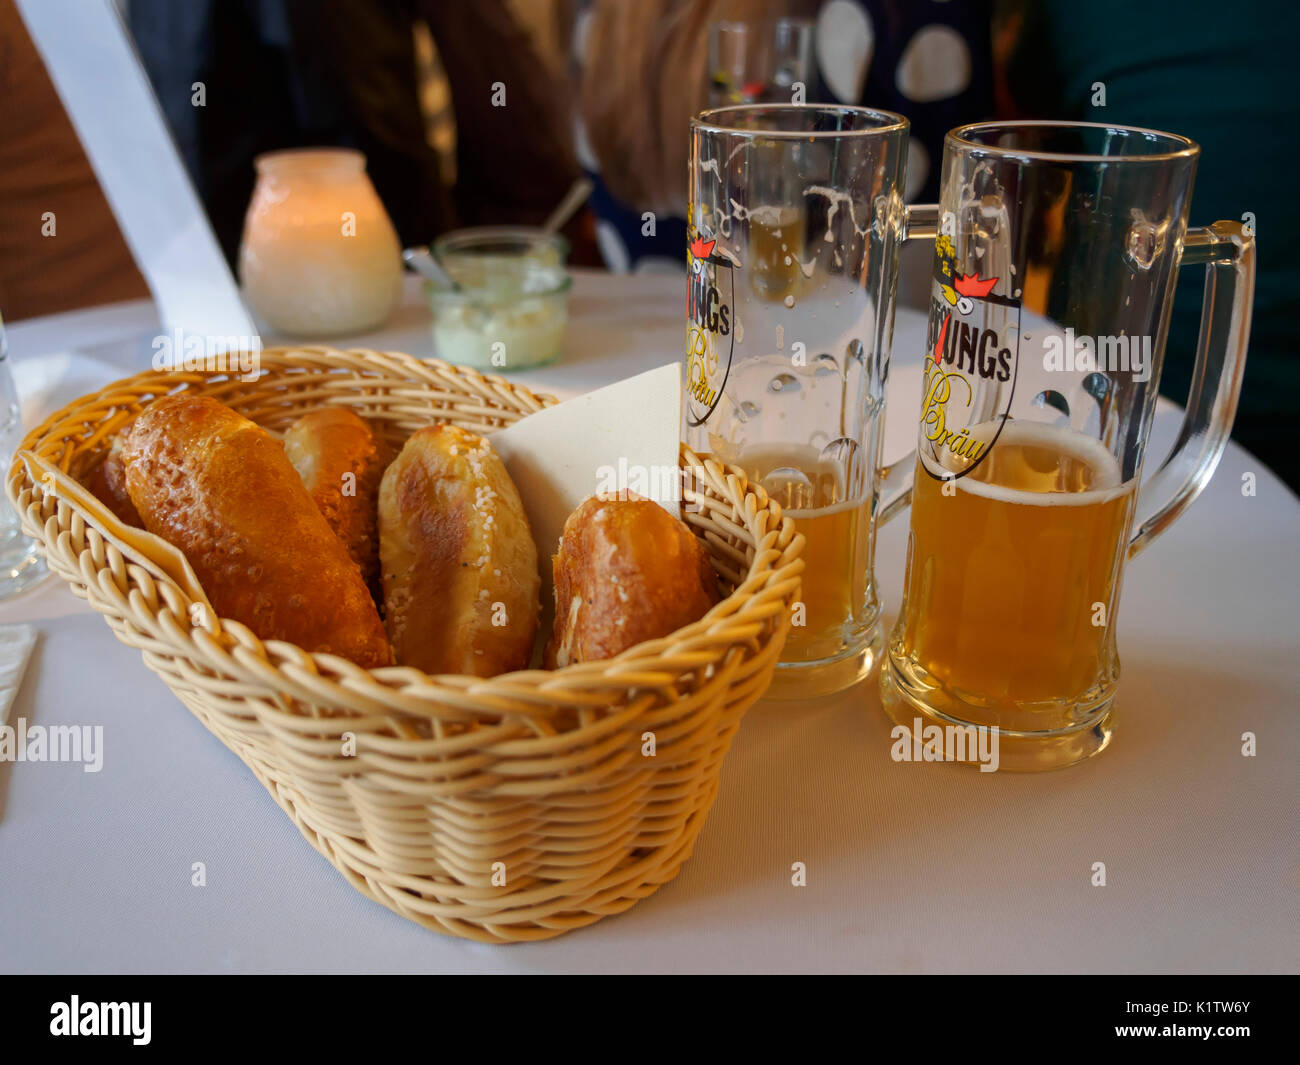 Bread and beer Stock Photo